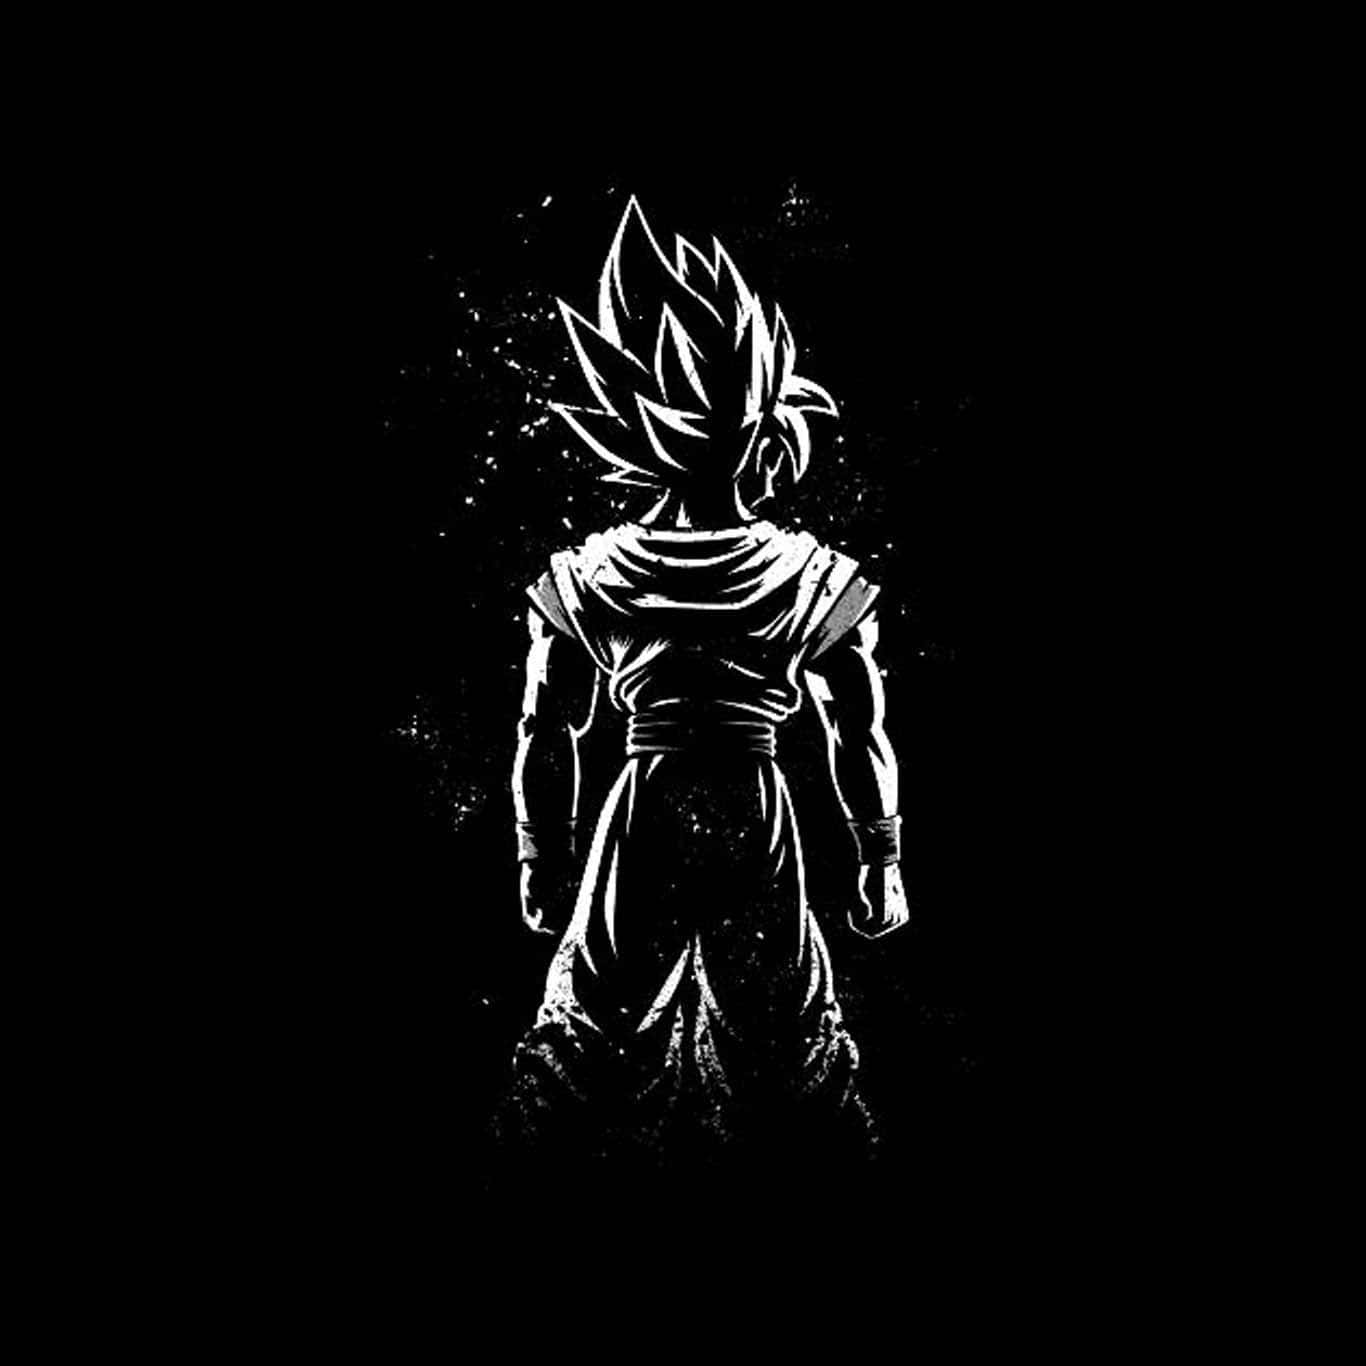 The Iconic Character Vegeta From the Anime Dragon Ball Z in Black and White Wallpaper